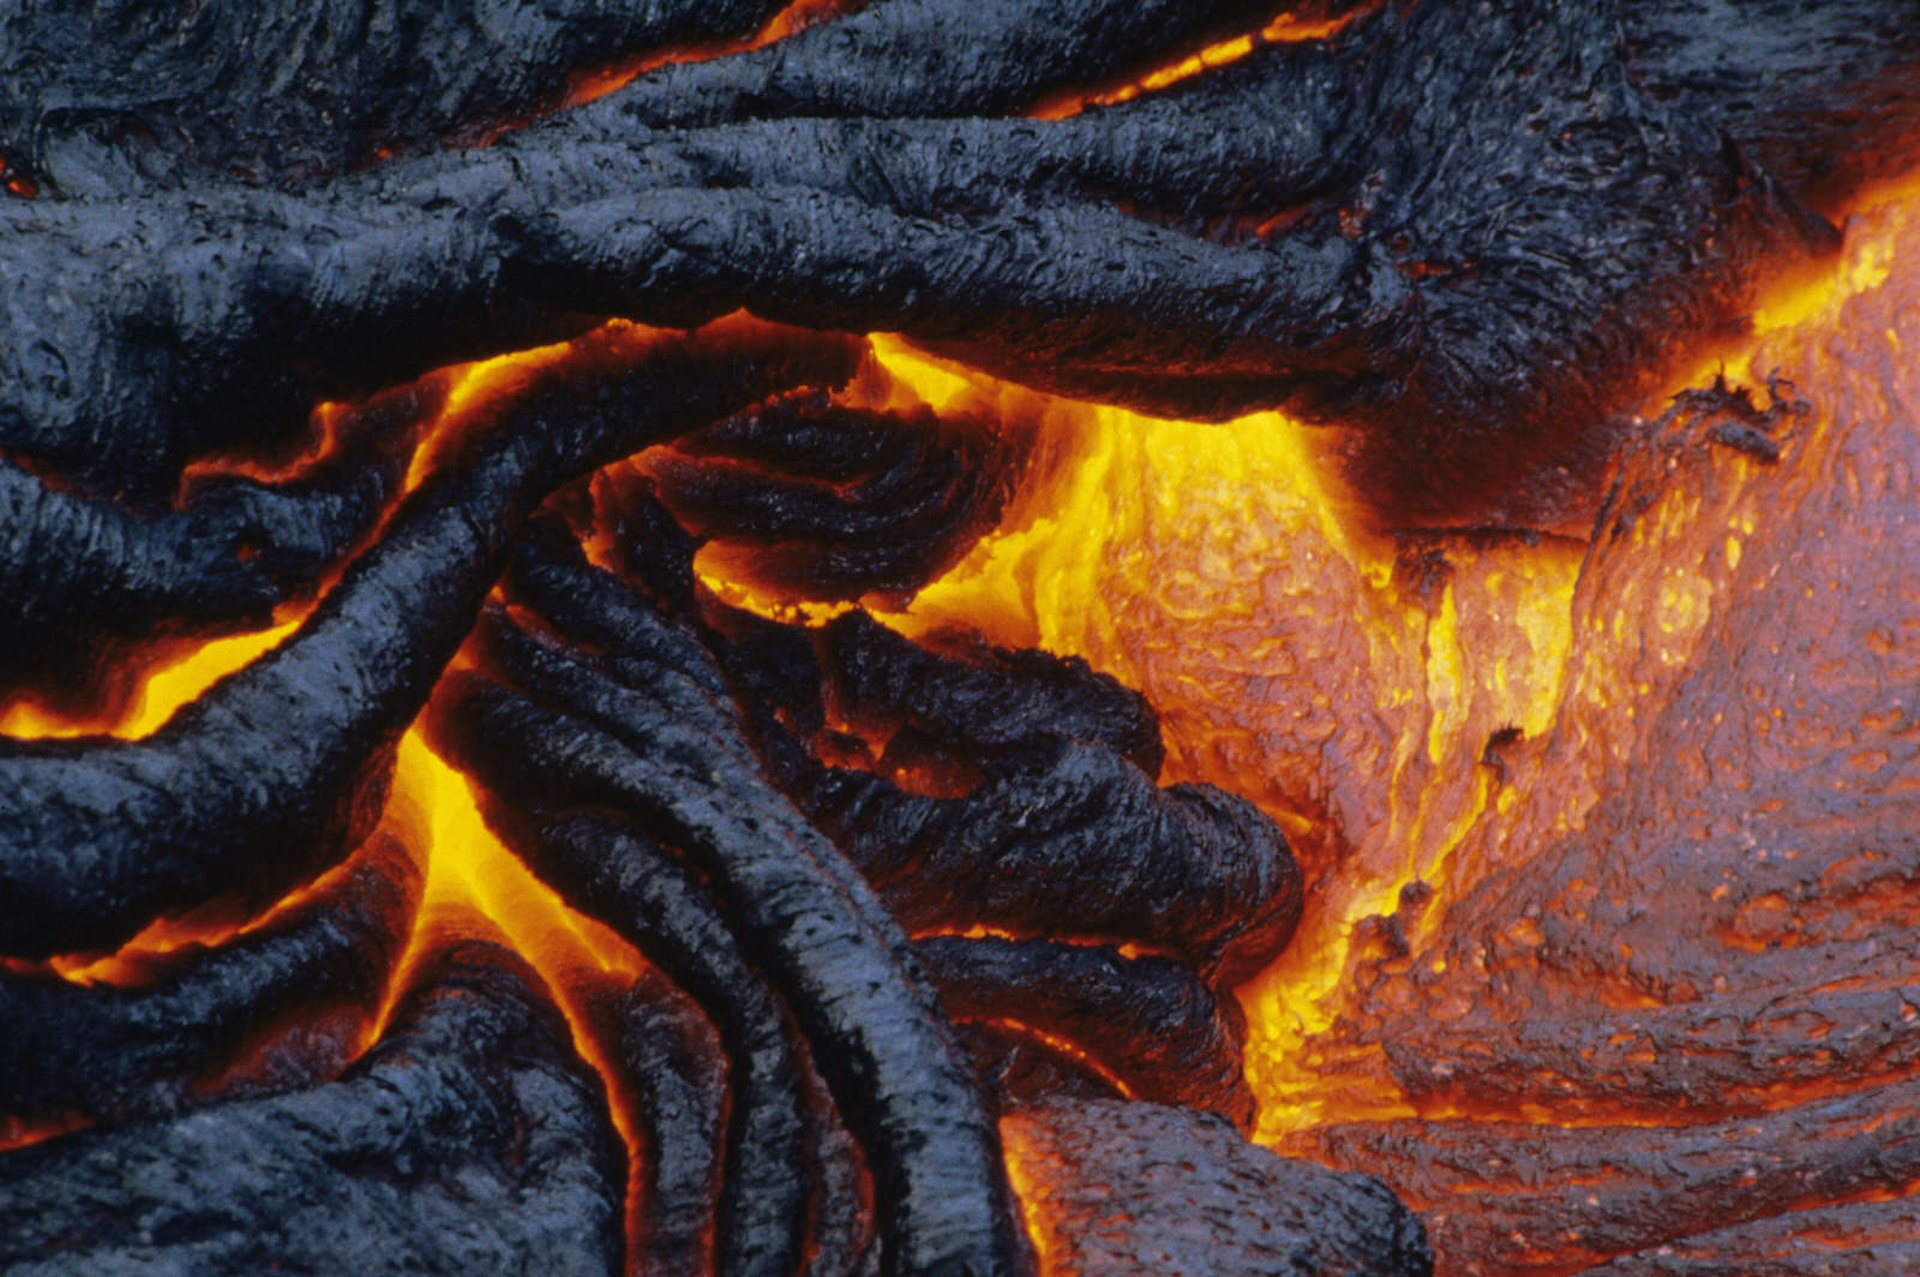 Pahoehoe lava oozing from within the Kilauea Volcano in Hawaii Volcanoes National Park © Ron Dahlquist / Getty Images